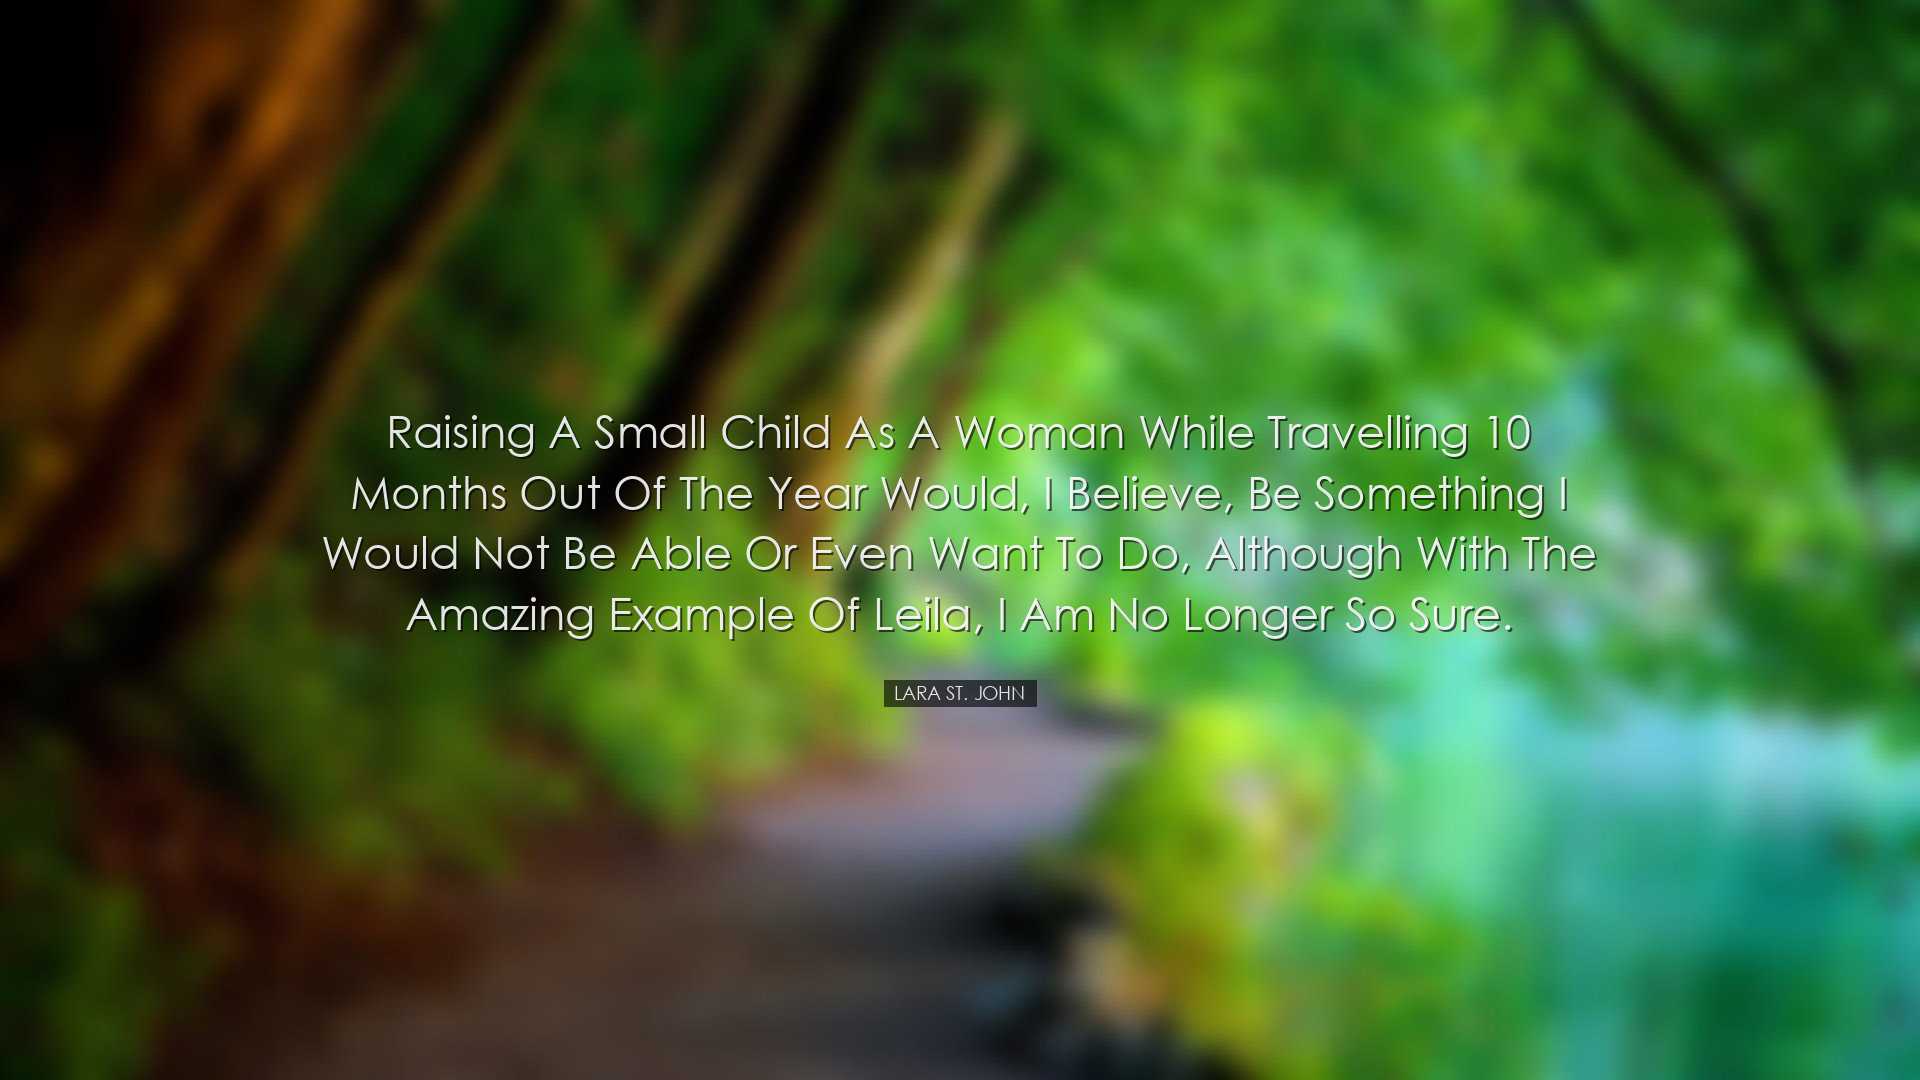 Raising a small child as a woman while travelling 10 months out of